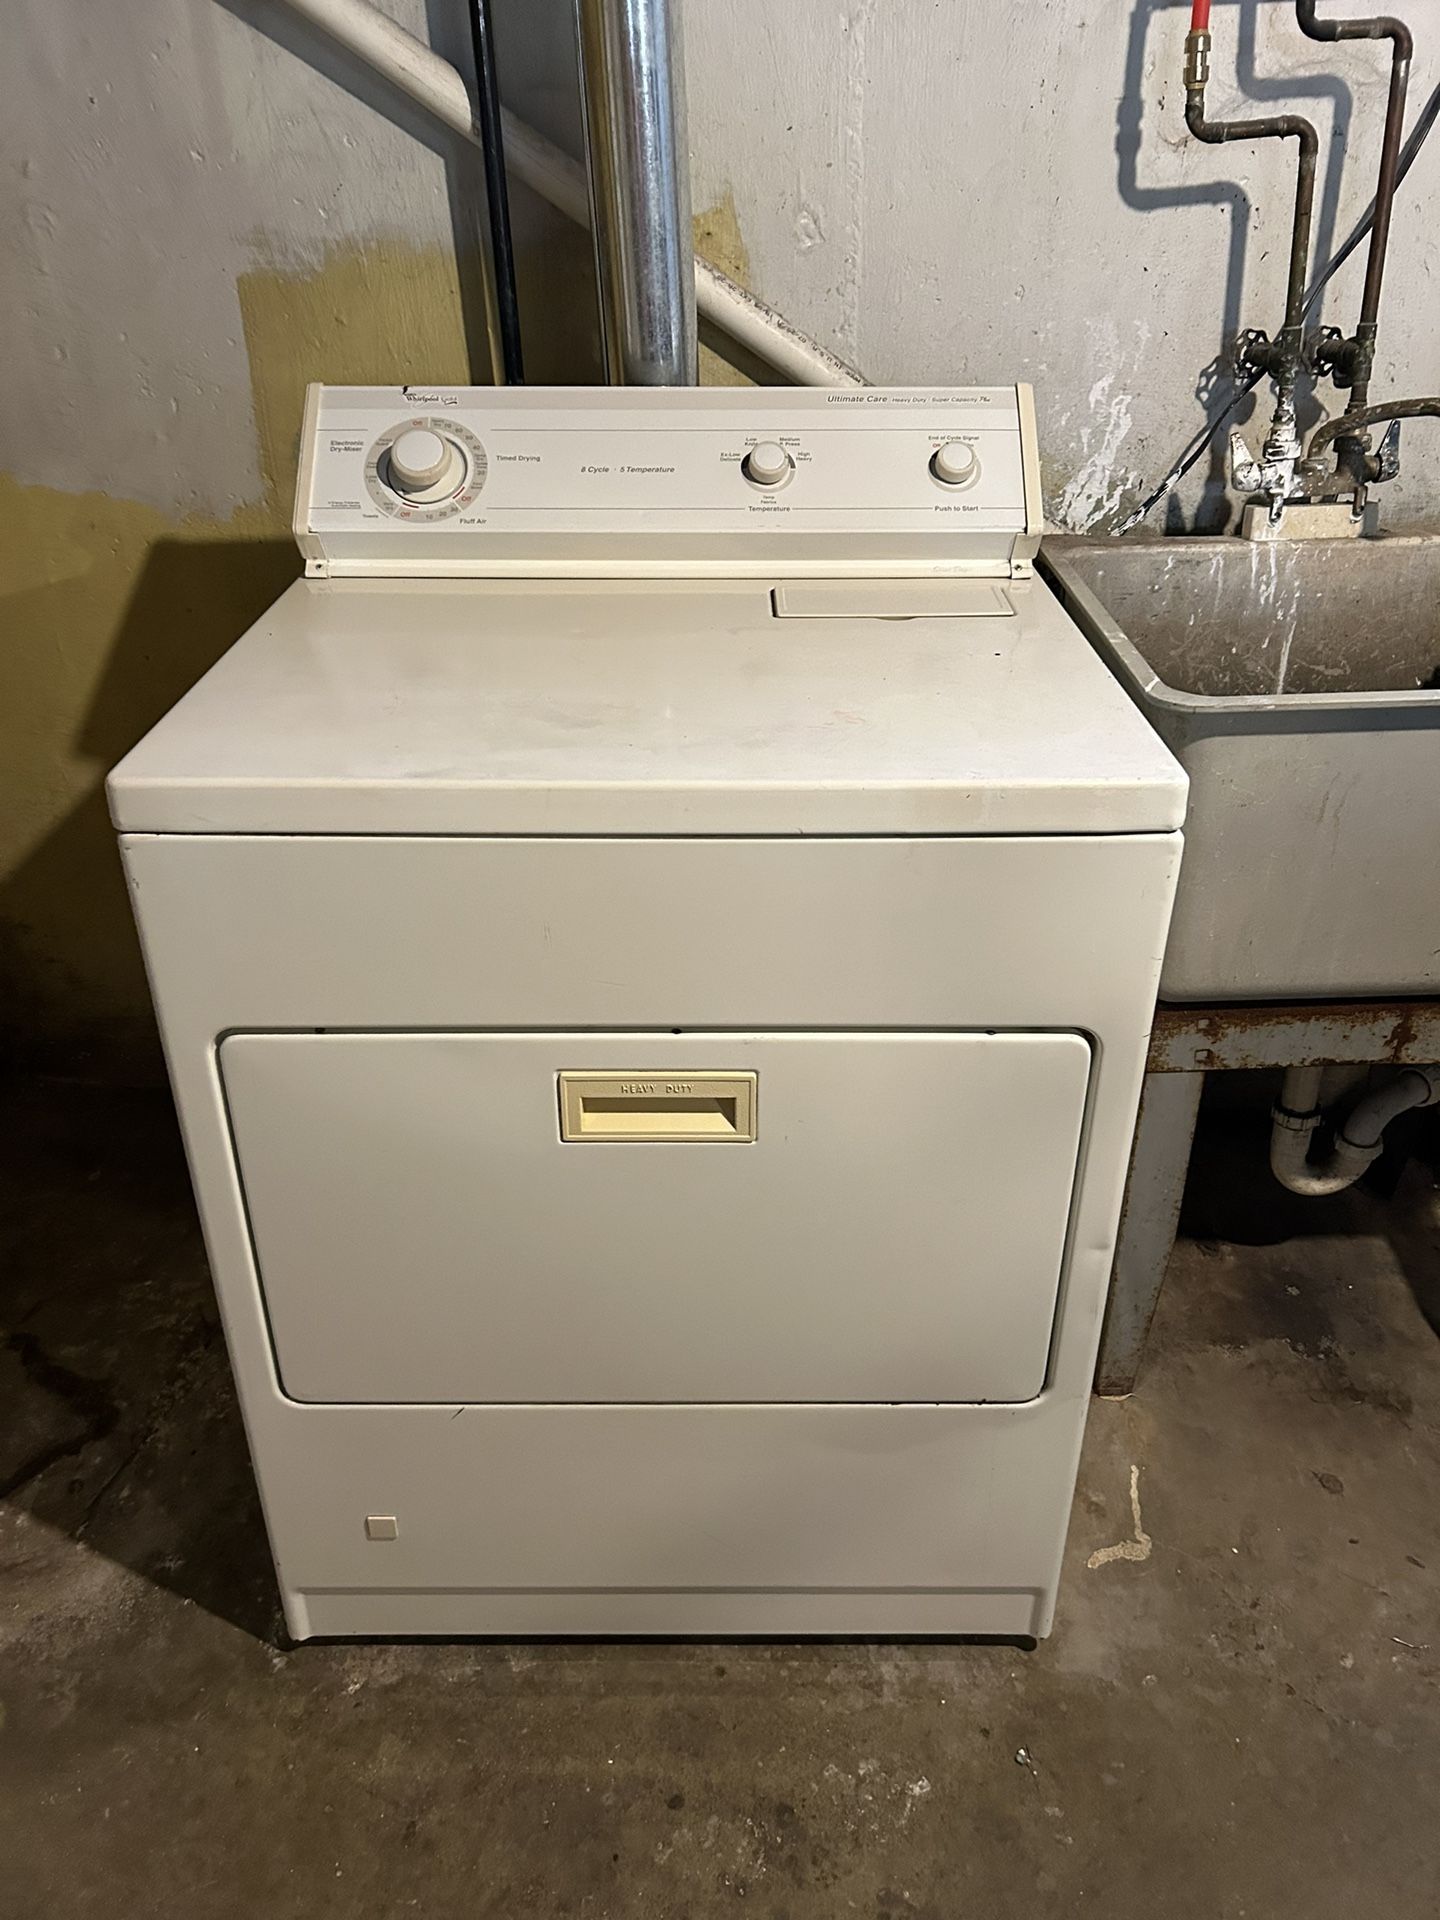 Dryer For Sale